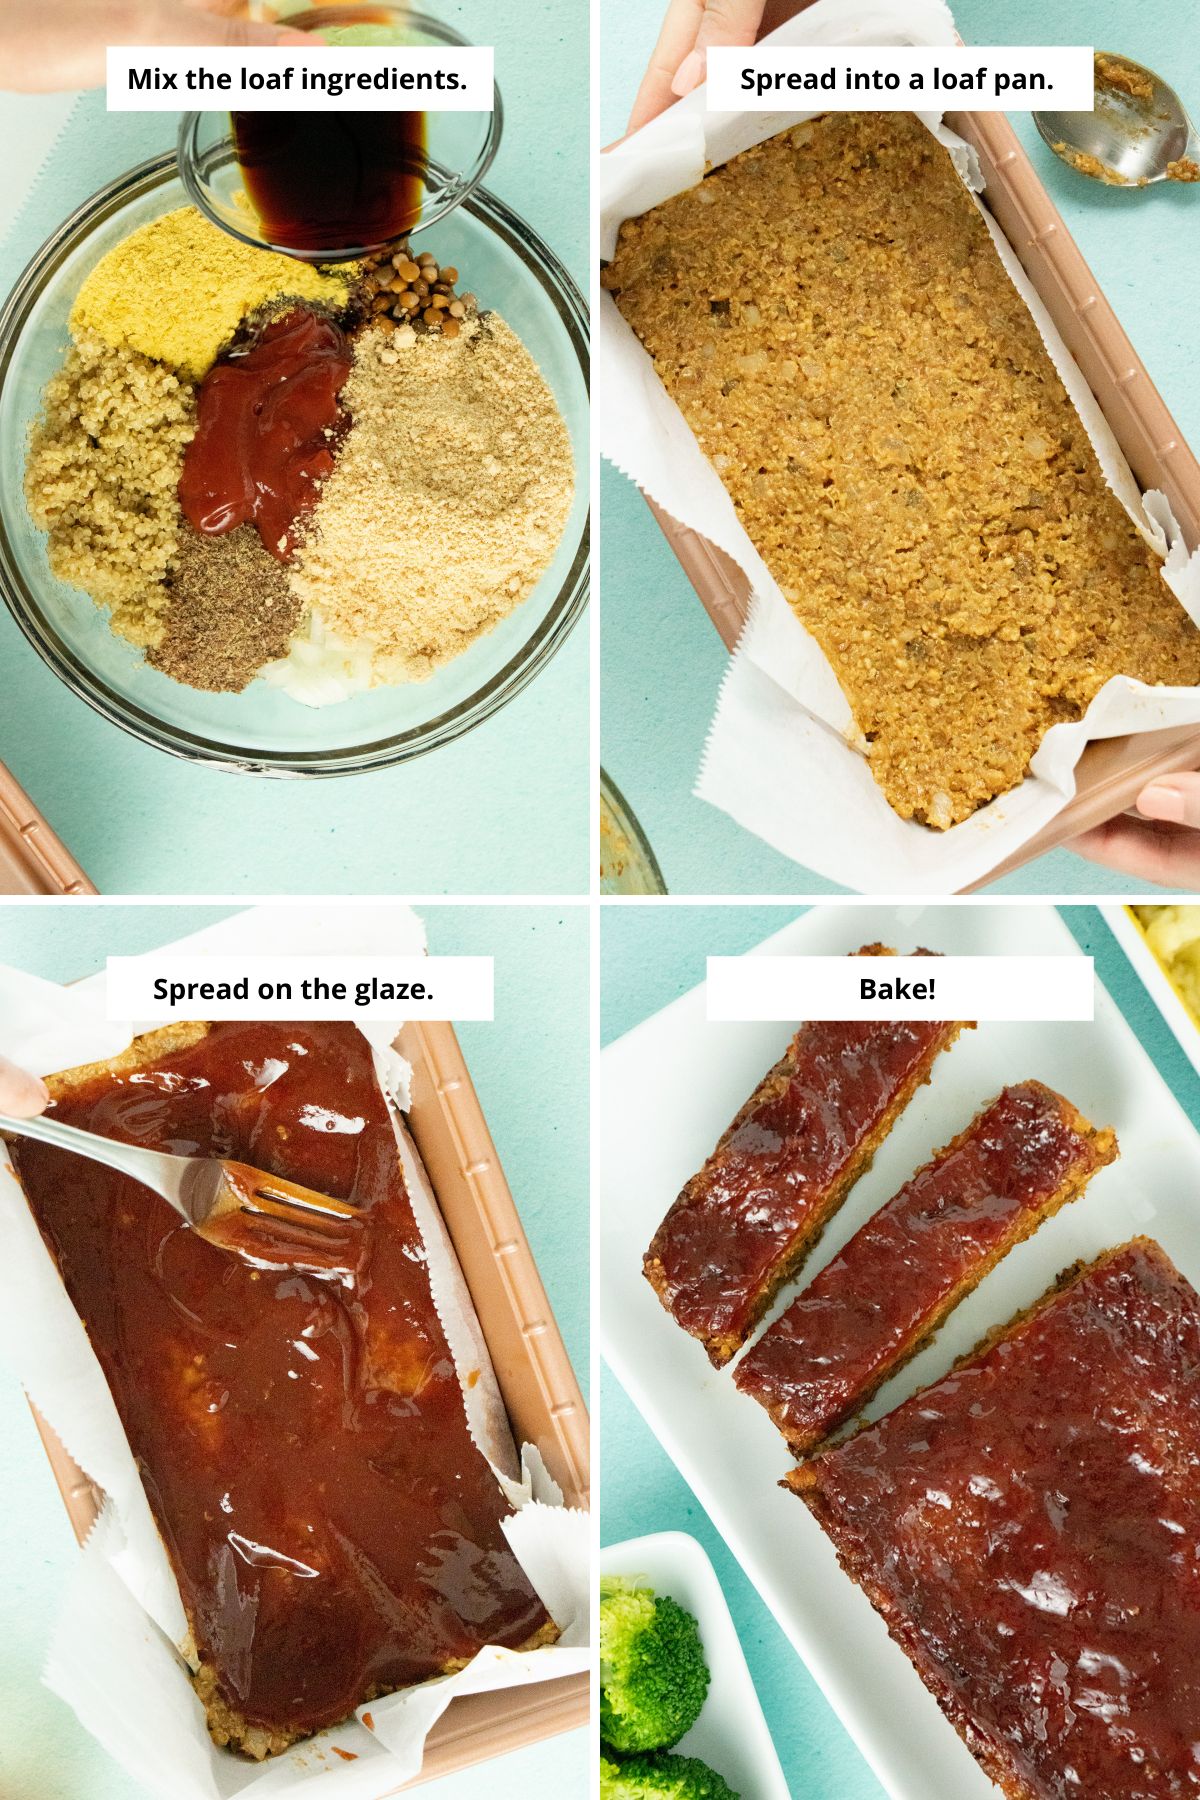 image collage showing the loaf ingredients in a bowl, the mixture spread into a pan, topping it with the glaze, and the finished loaf